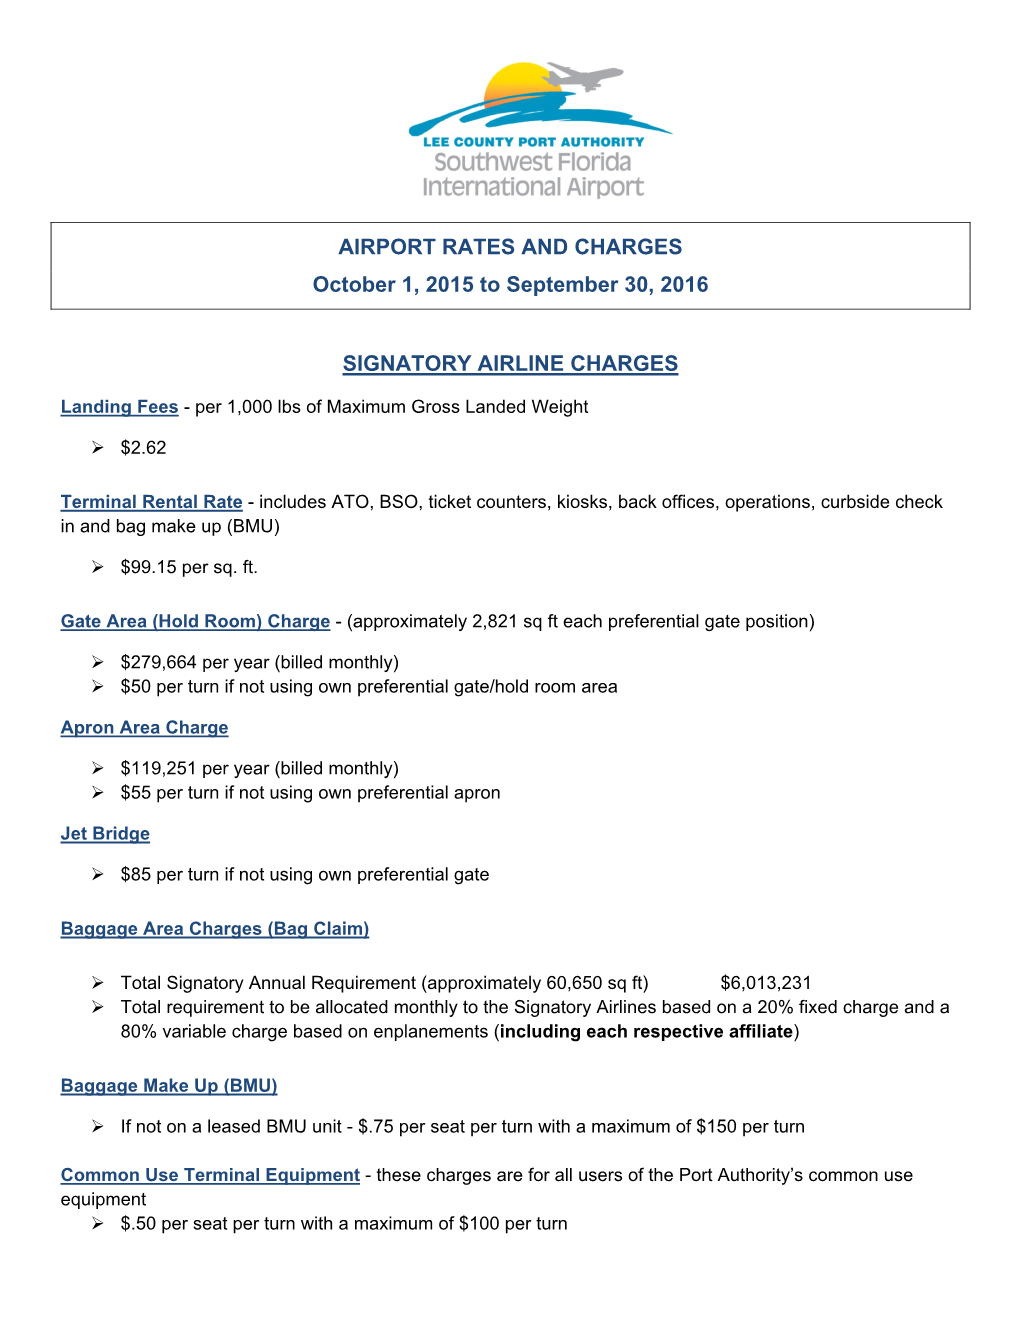 AIRPORT RATES and CHARGES October 1, 2015 to September 30, 2016